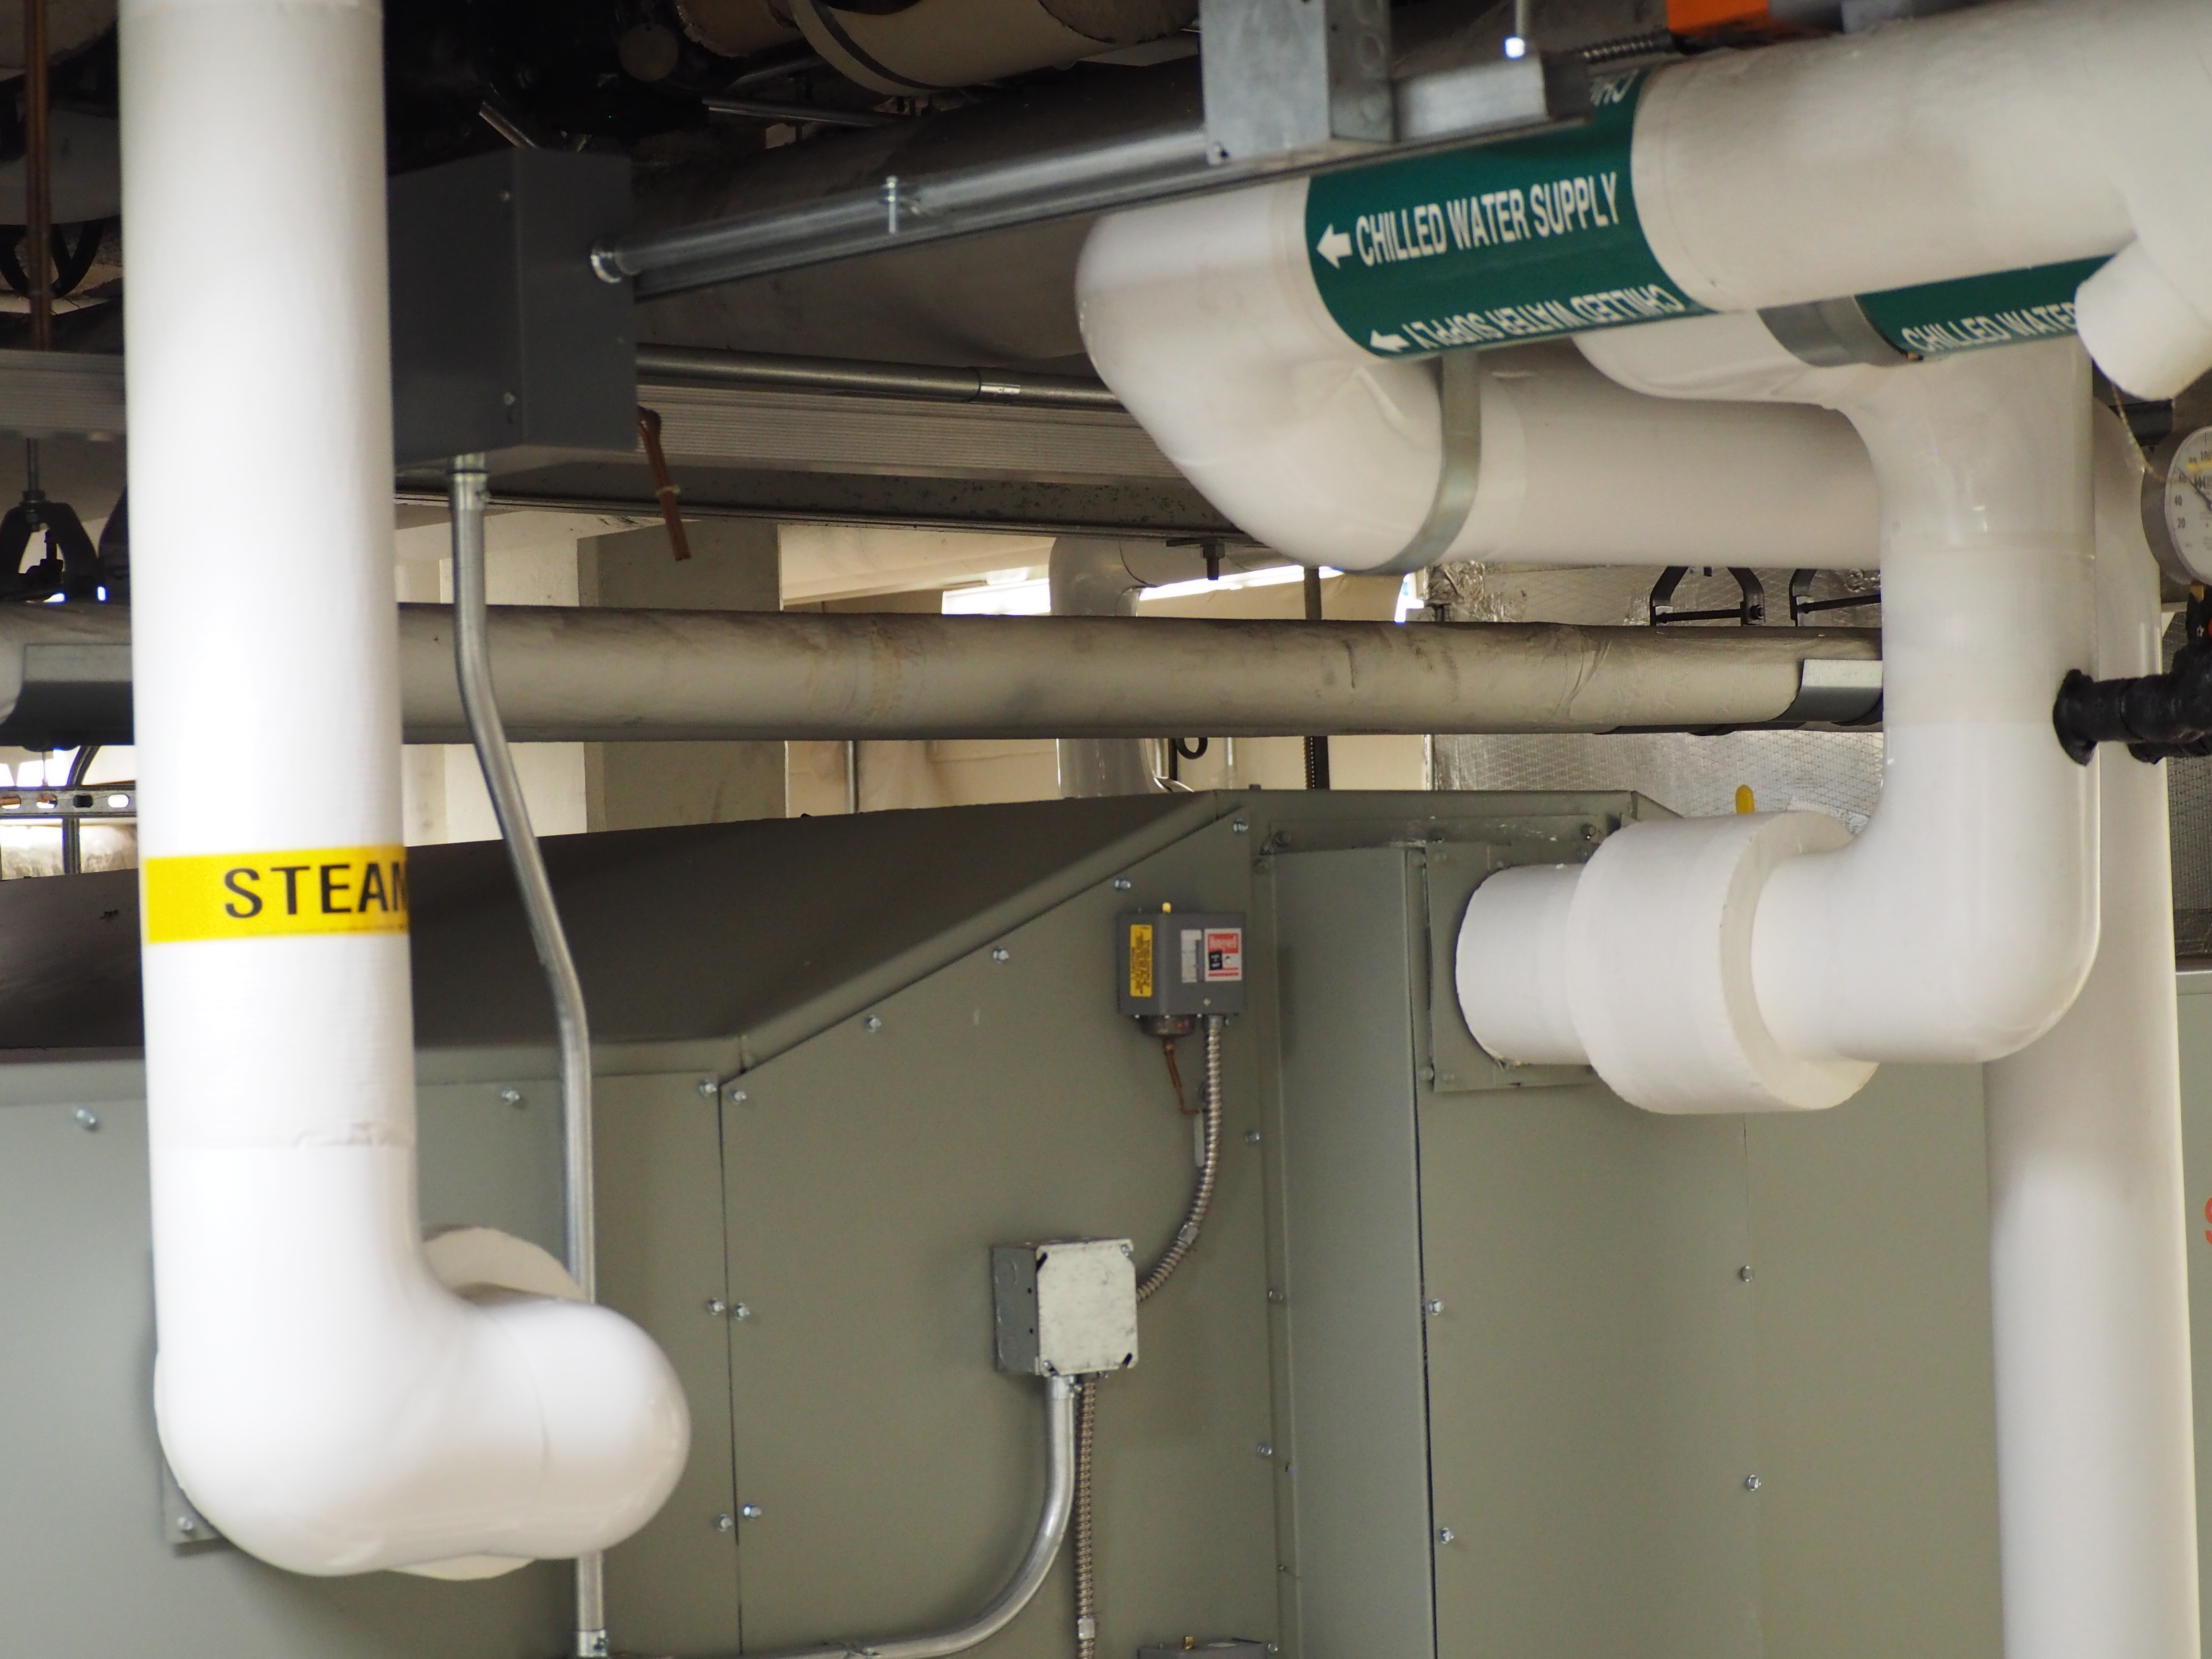 HVAC Overview Part II: Efficient Air Conditioning with RTUs and AHUs